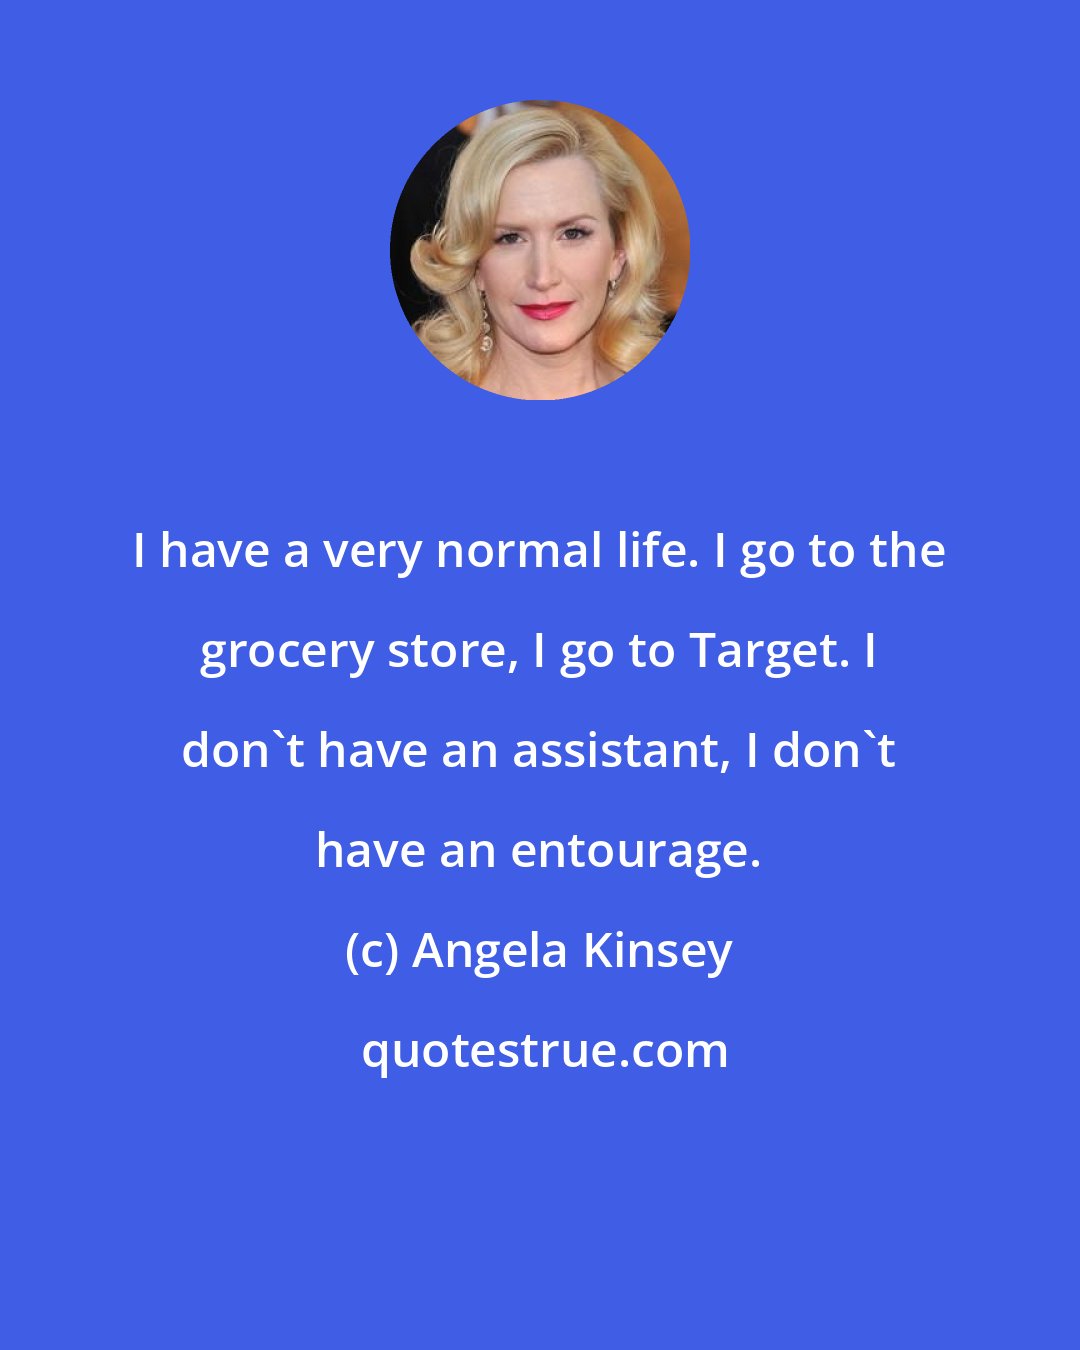 Angela Kinsey: I have a very normal life. I go to the grocery store, I go to Target. I don't have an assistant, I don't have an entourage.